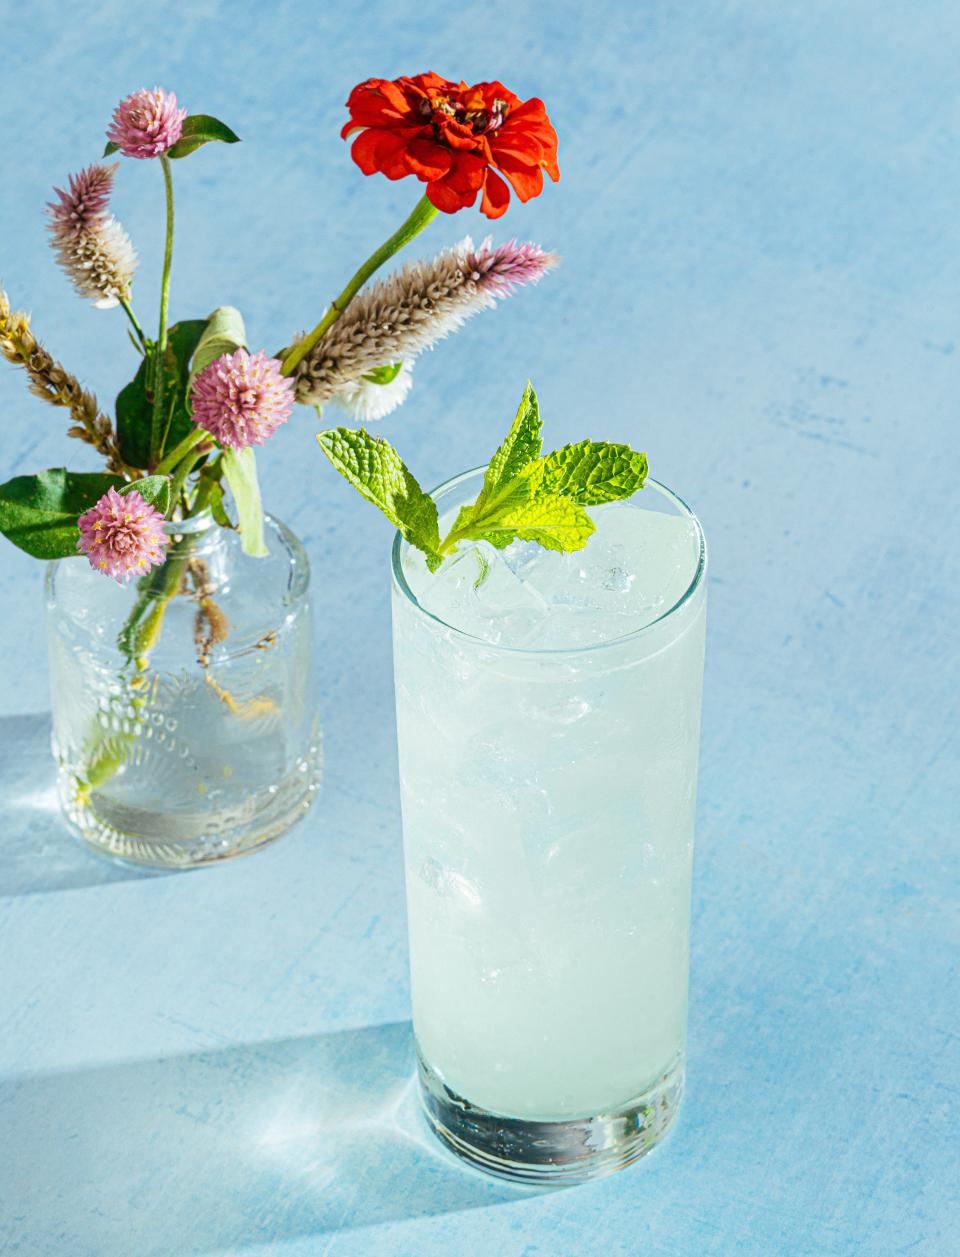 A twist on the classic Southside, the “Whose Side” blends Hat Trick gin, zesty lemon, aromatic mint and cooling cucumber at the Woodside Bistro at the historic, renovated Woodside Mill in West Greenville.